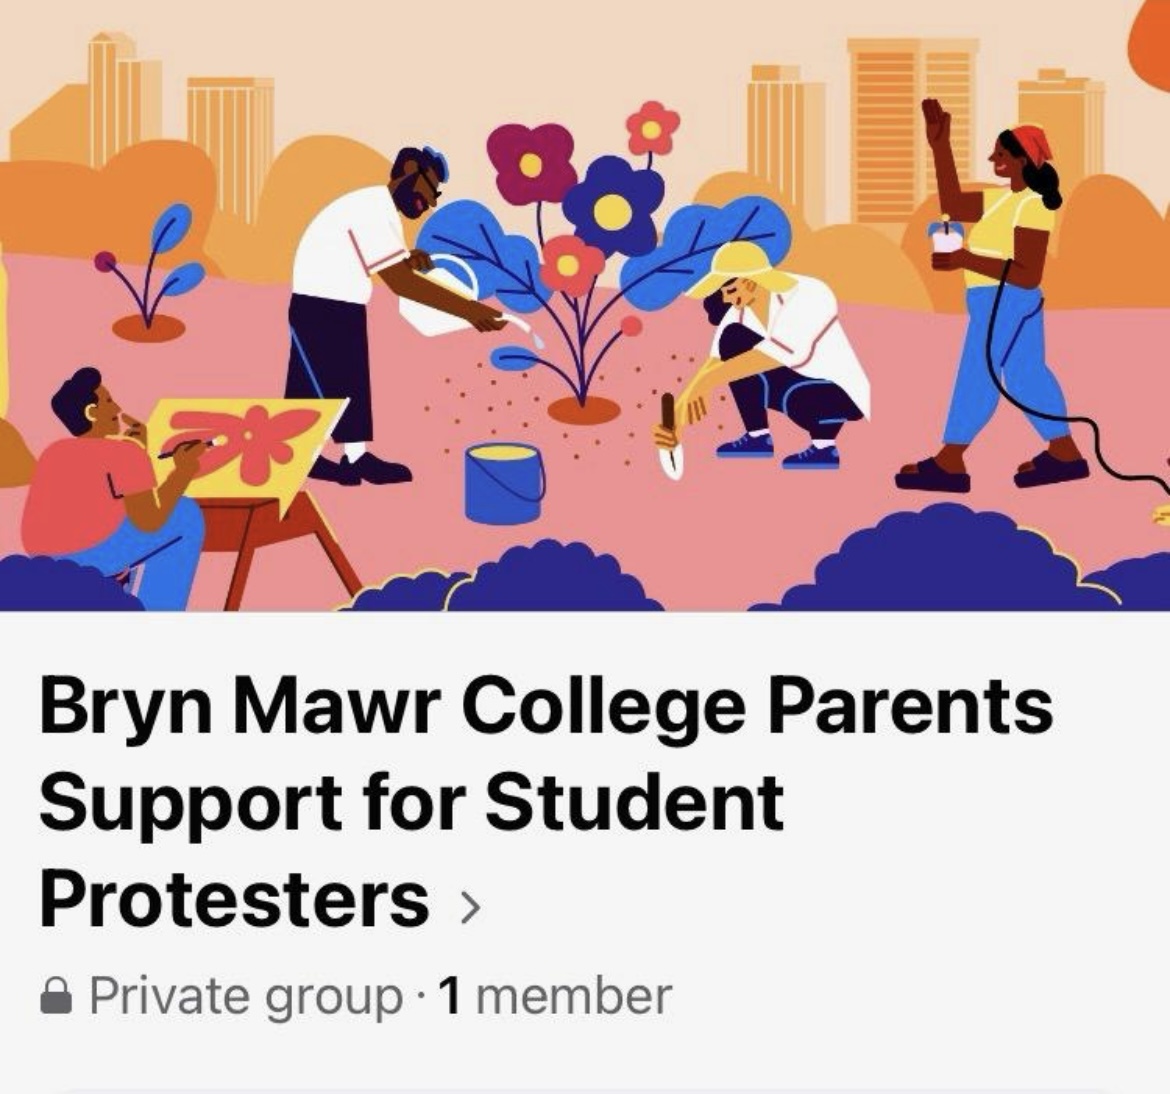 Open Letter to Bryn Mawr College Administration from Bryn Mawr College Parents